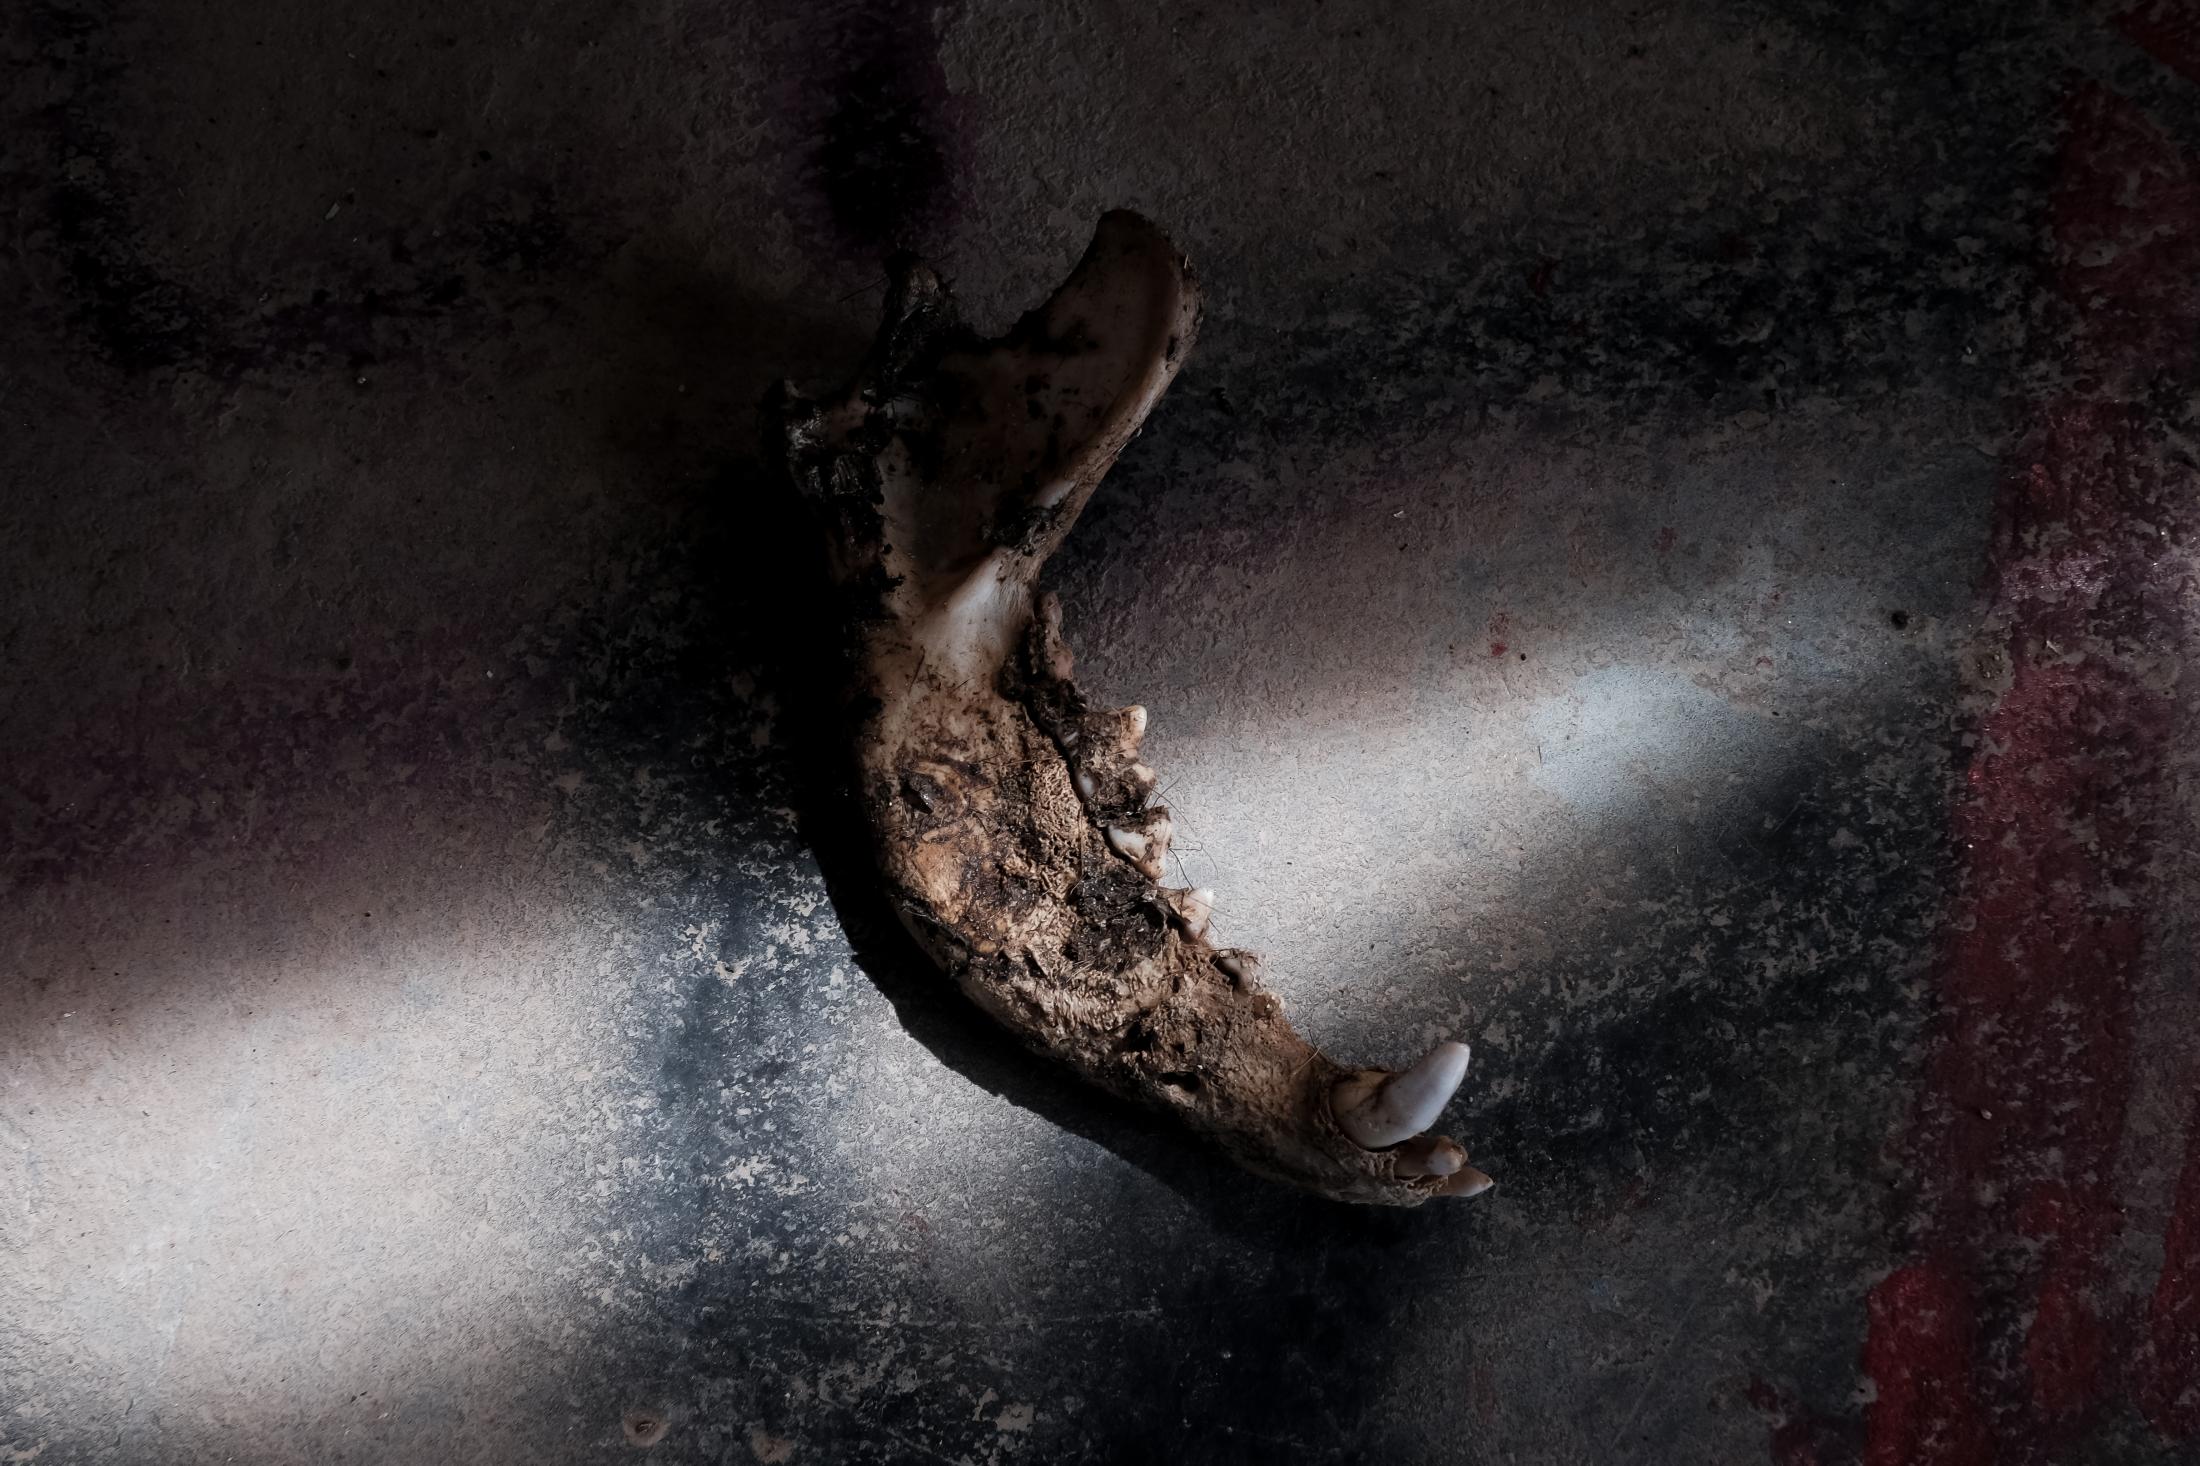 Last Free Place - A jaw bone is left on a table inside a shack of Slab...